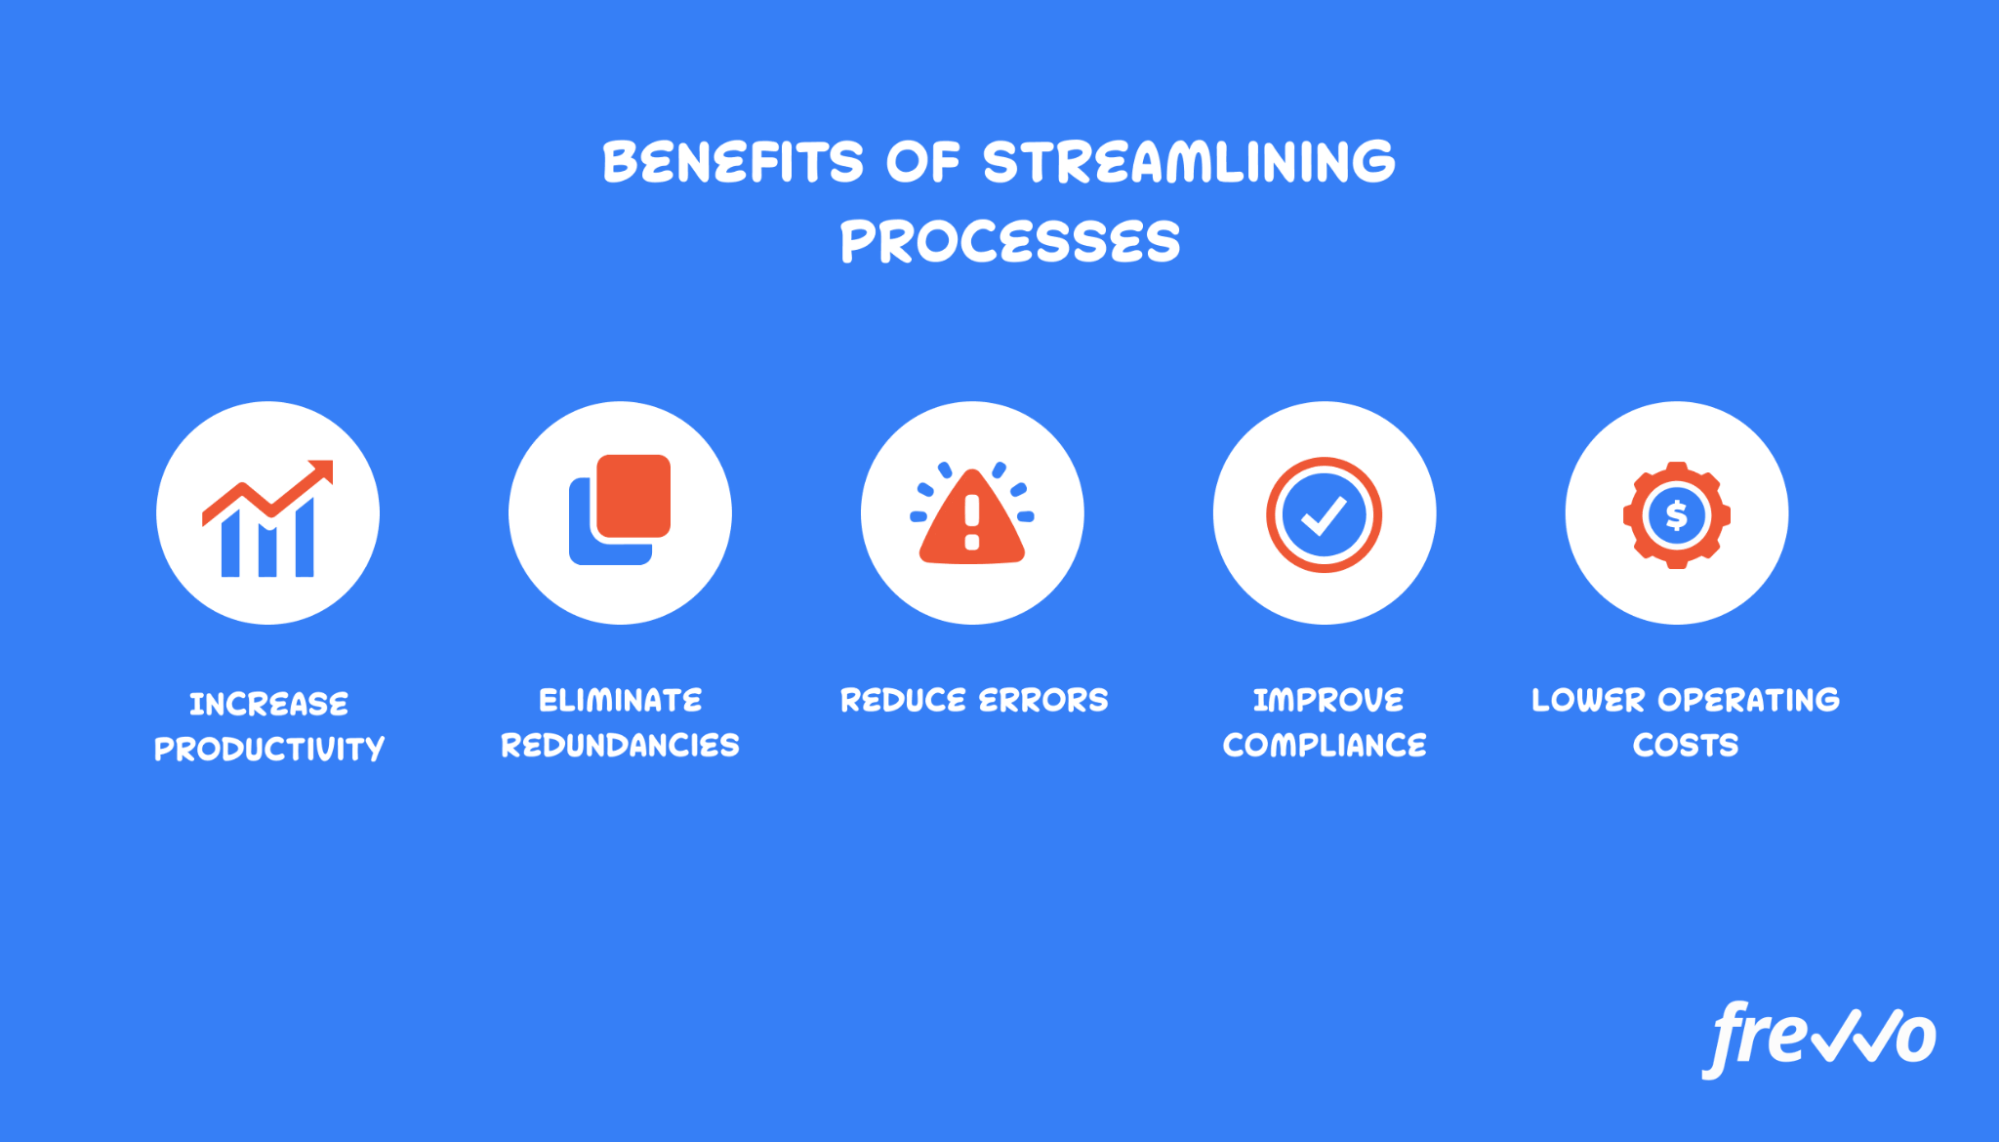 Benefits of streamlining business processes